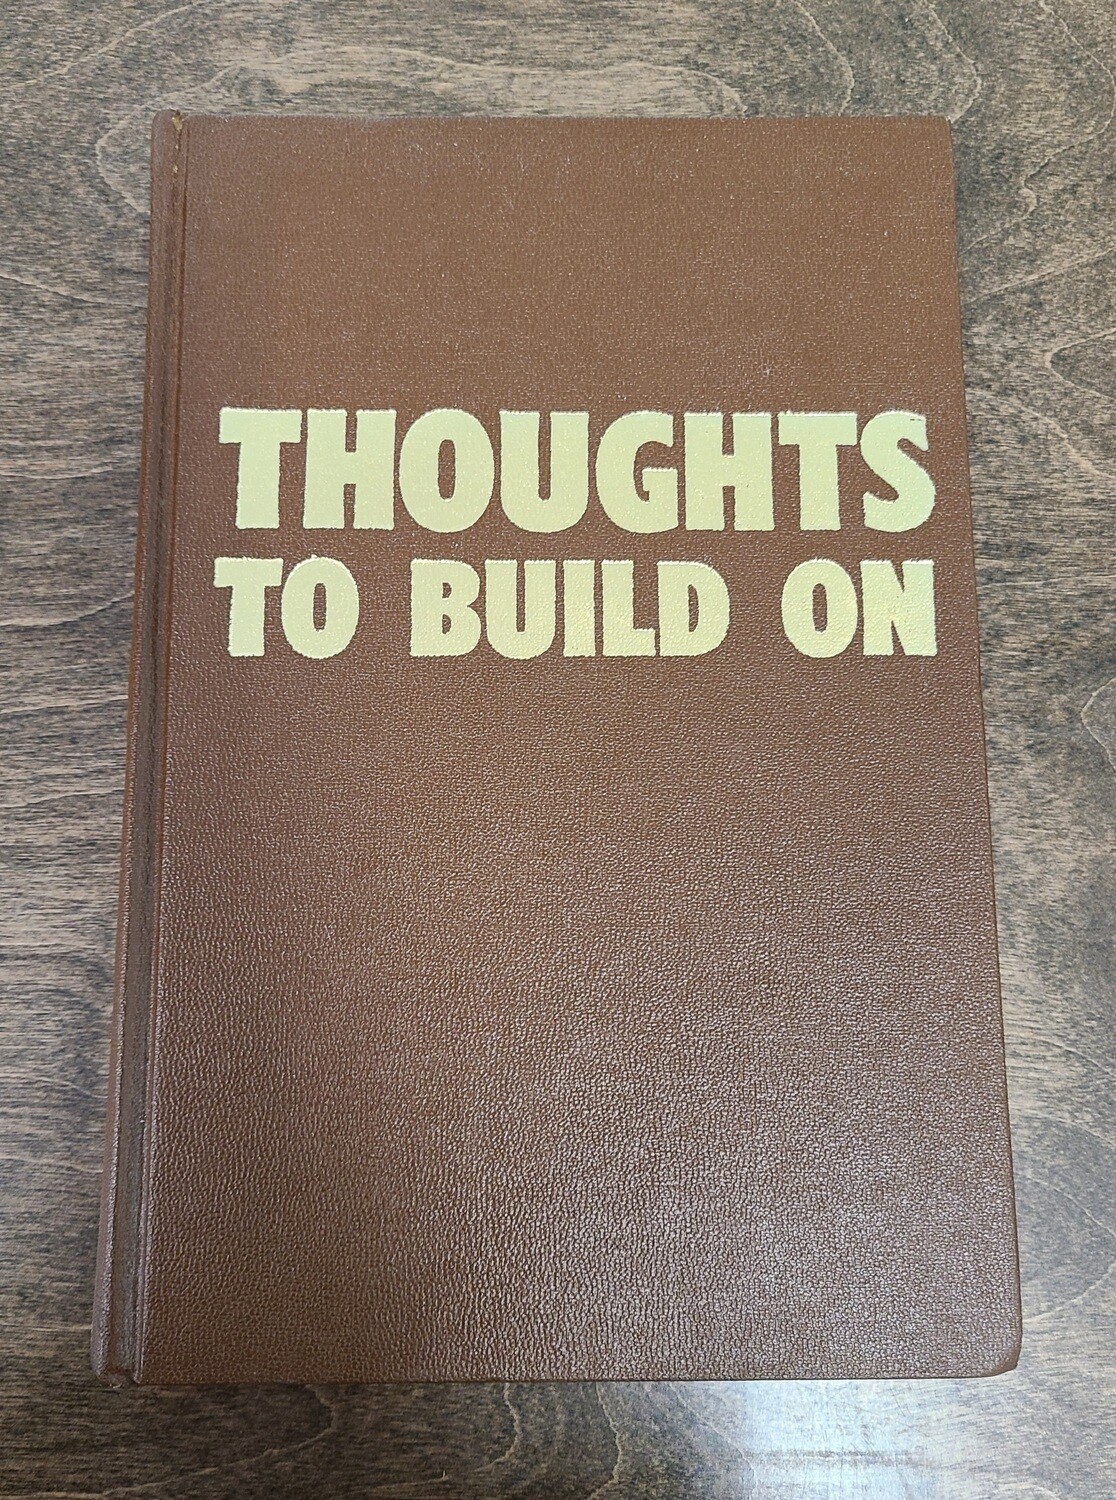 Thoughts to Build On by M. R. Kopmeyer